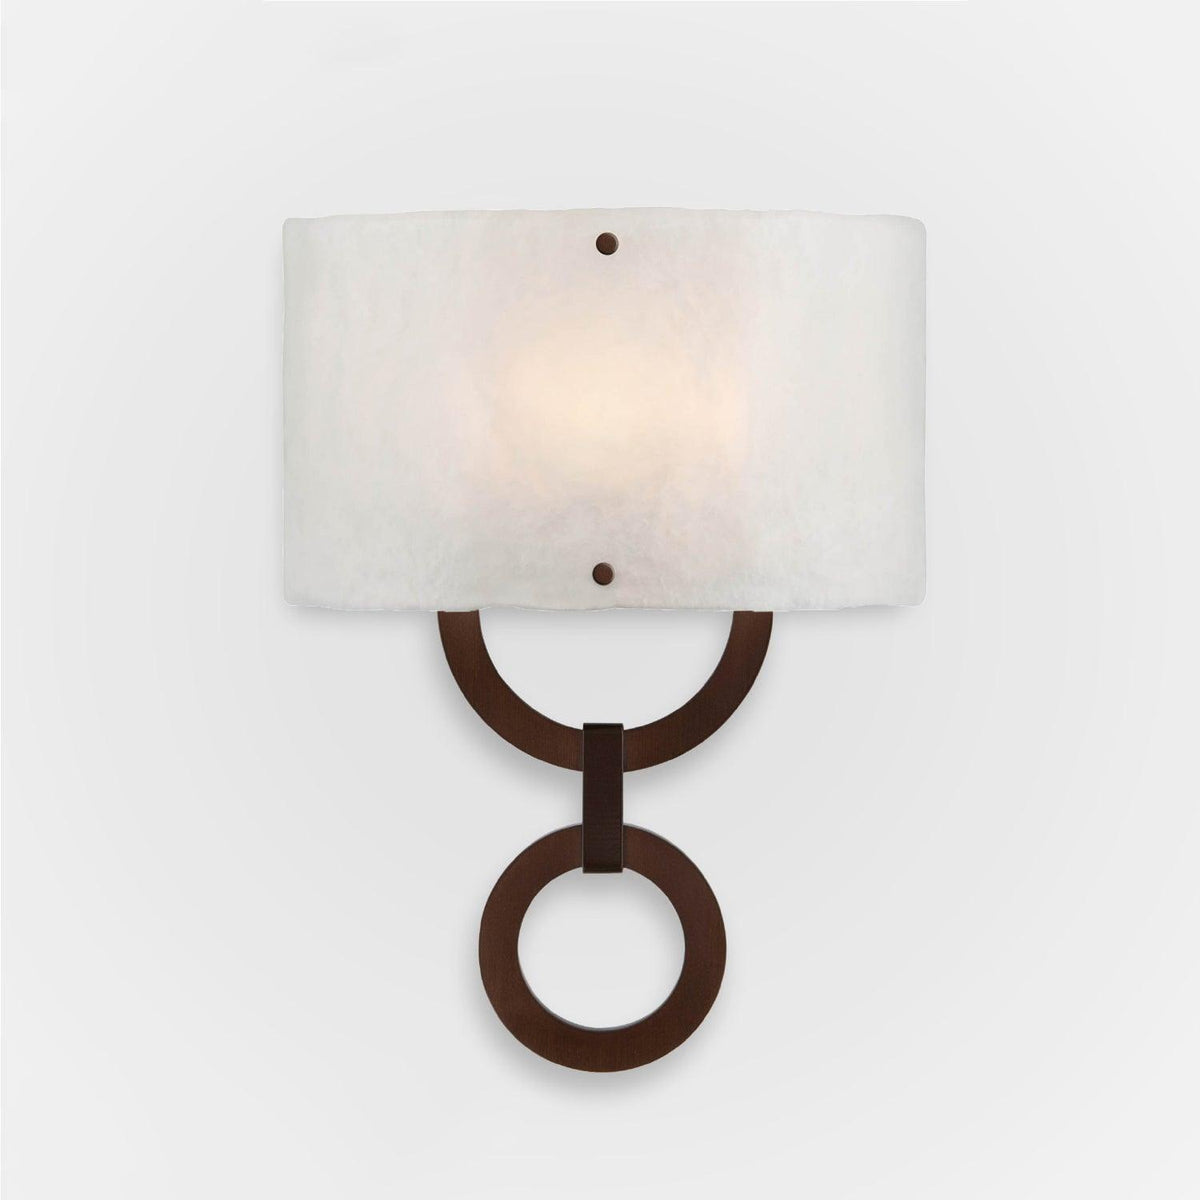 Hammerton Studio - Carlyle Round Link Cover Sconce - CSB0033-0D-RB-FG-E2 | Montreal Lighting & Hardware